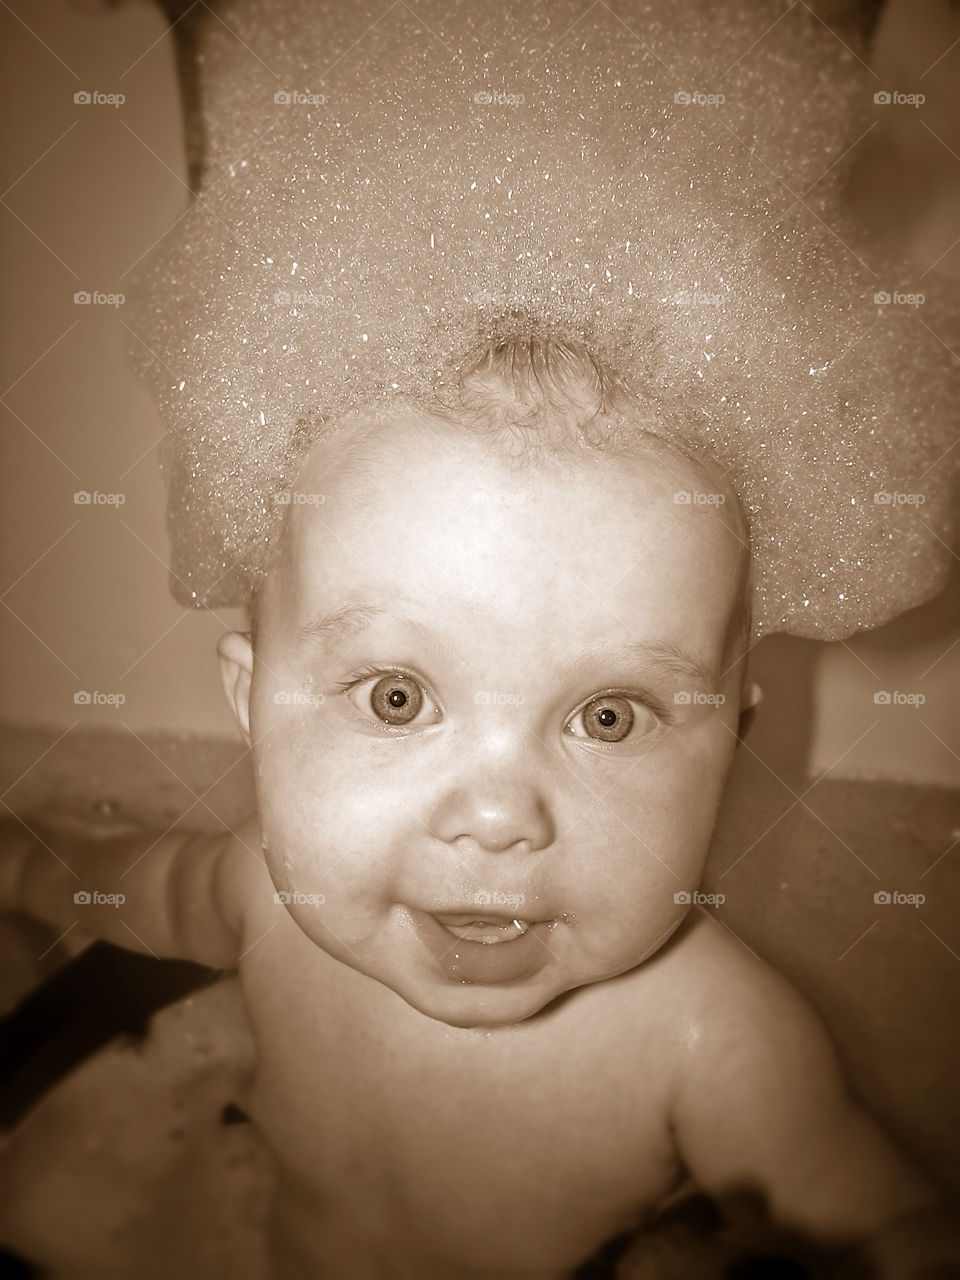 baby bubbles eyes tub by darrellperry